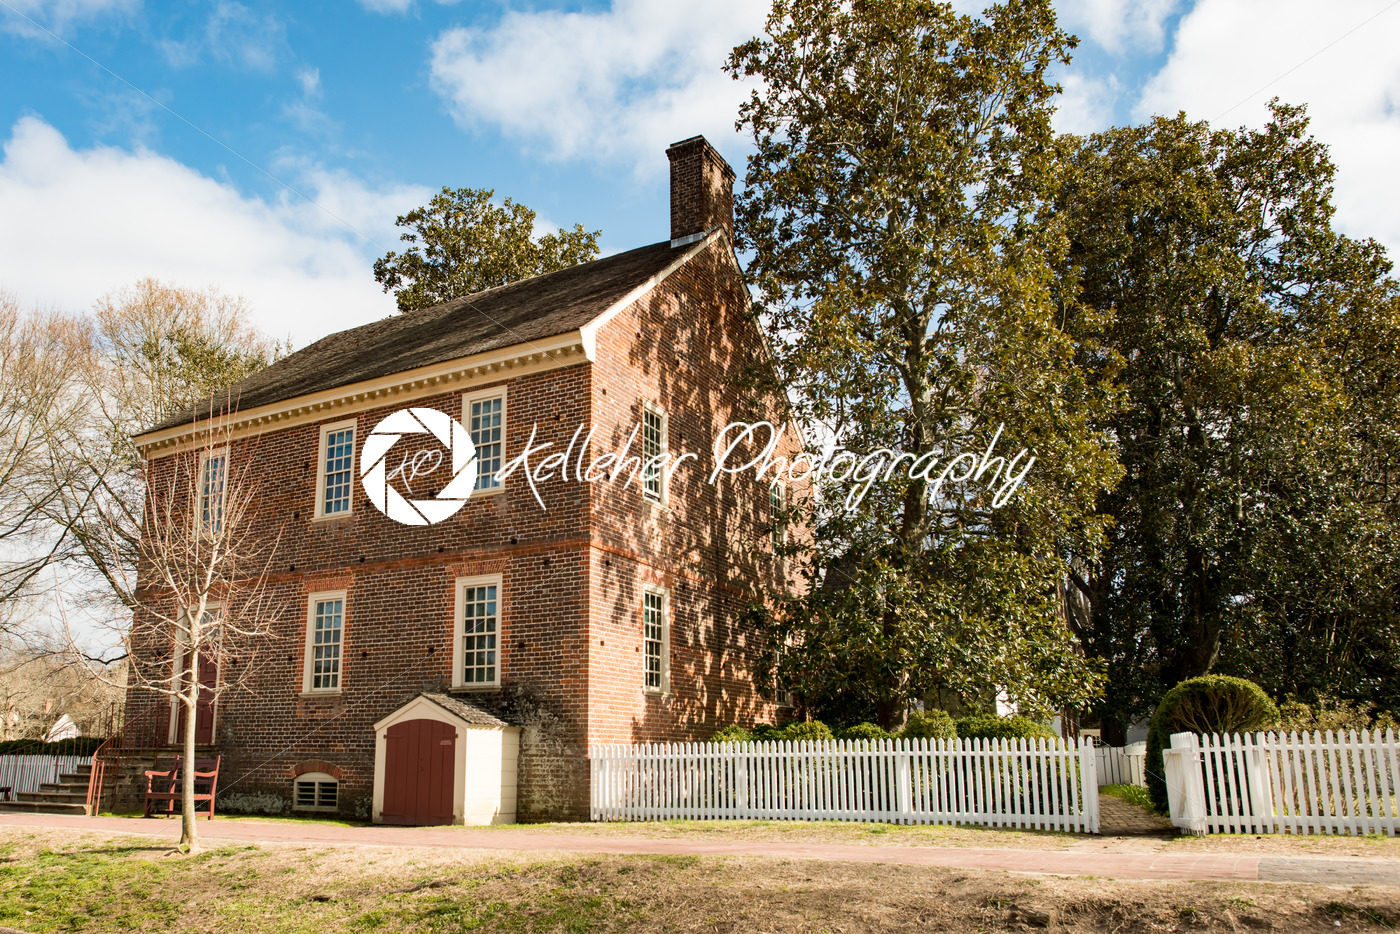 Williamsburg, Virginia – March 26, 2018: Historic houses and buildings in Williamsburg Virginia - Kelleher Photography Store